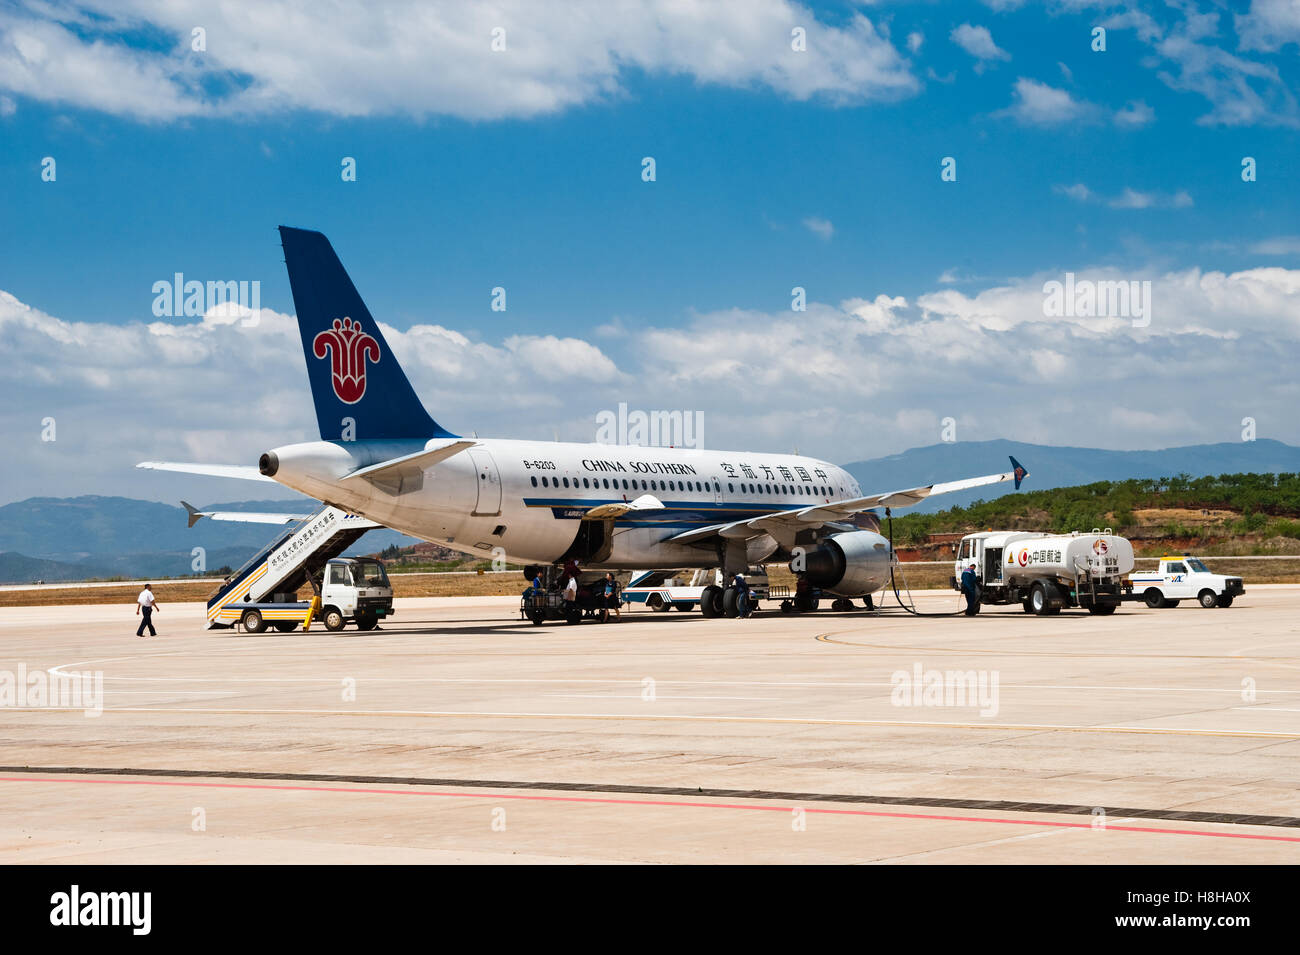 Airbus A319 of the China Southern Airlines at Huanglong airport, China, Asia Stock Photo